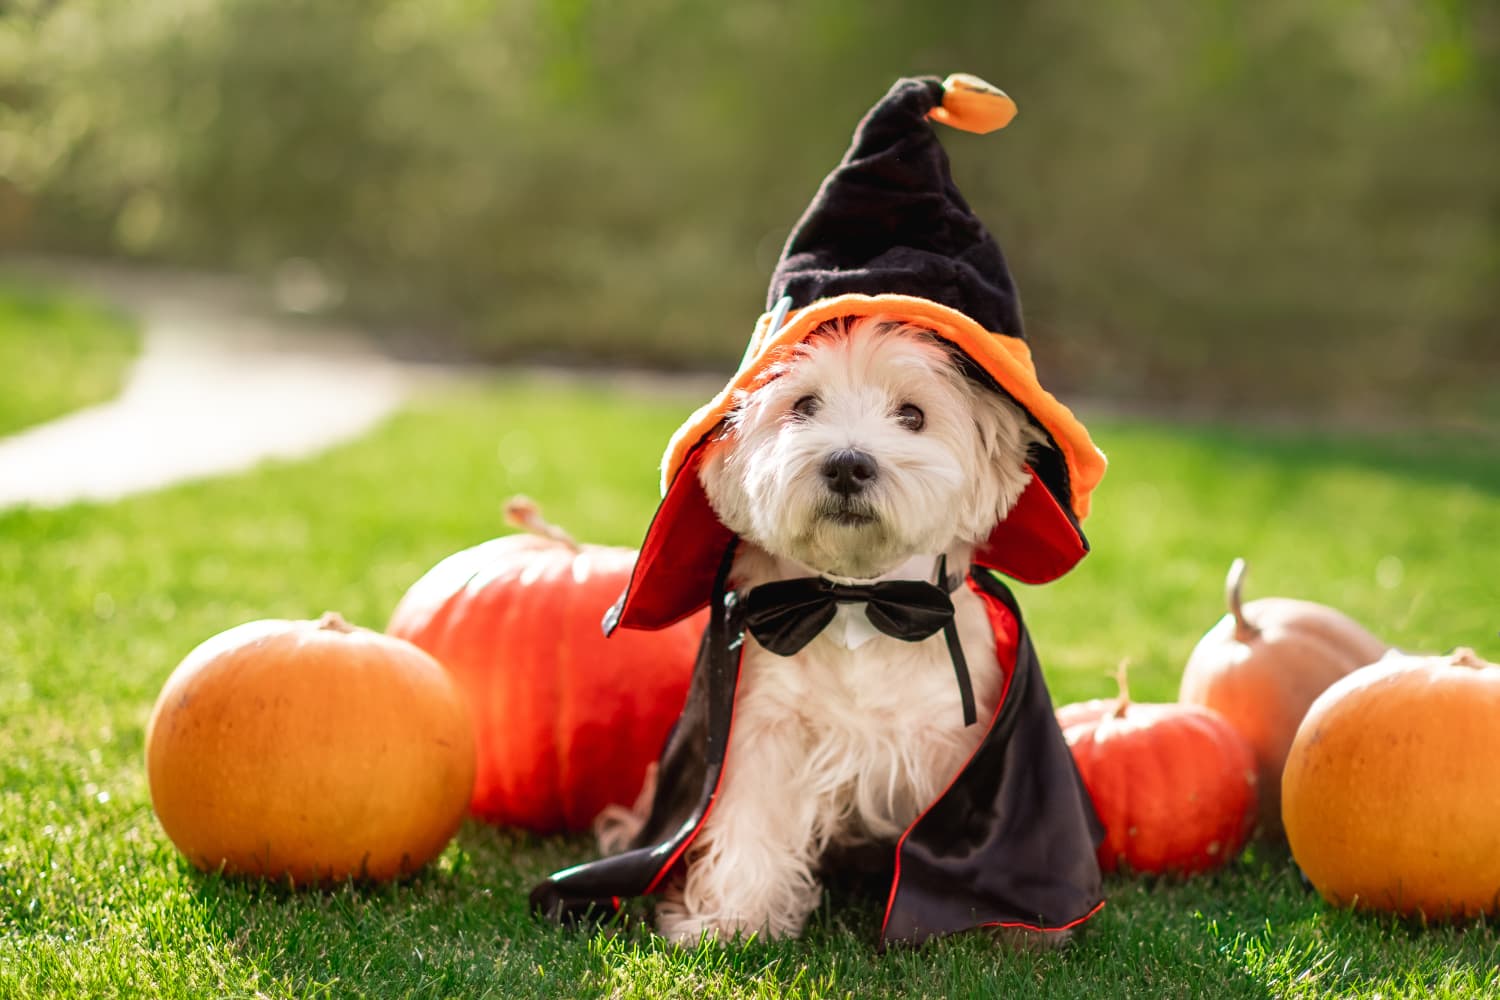 These Are The Top Dog Hallowen Costumes of 2022, According to Rover